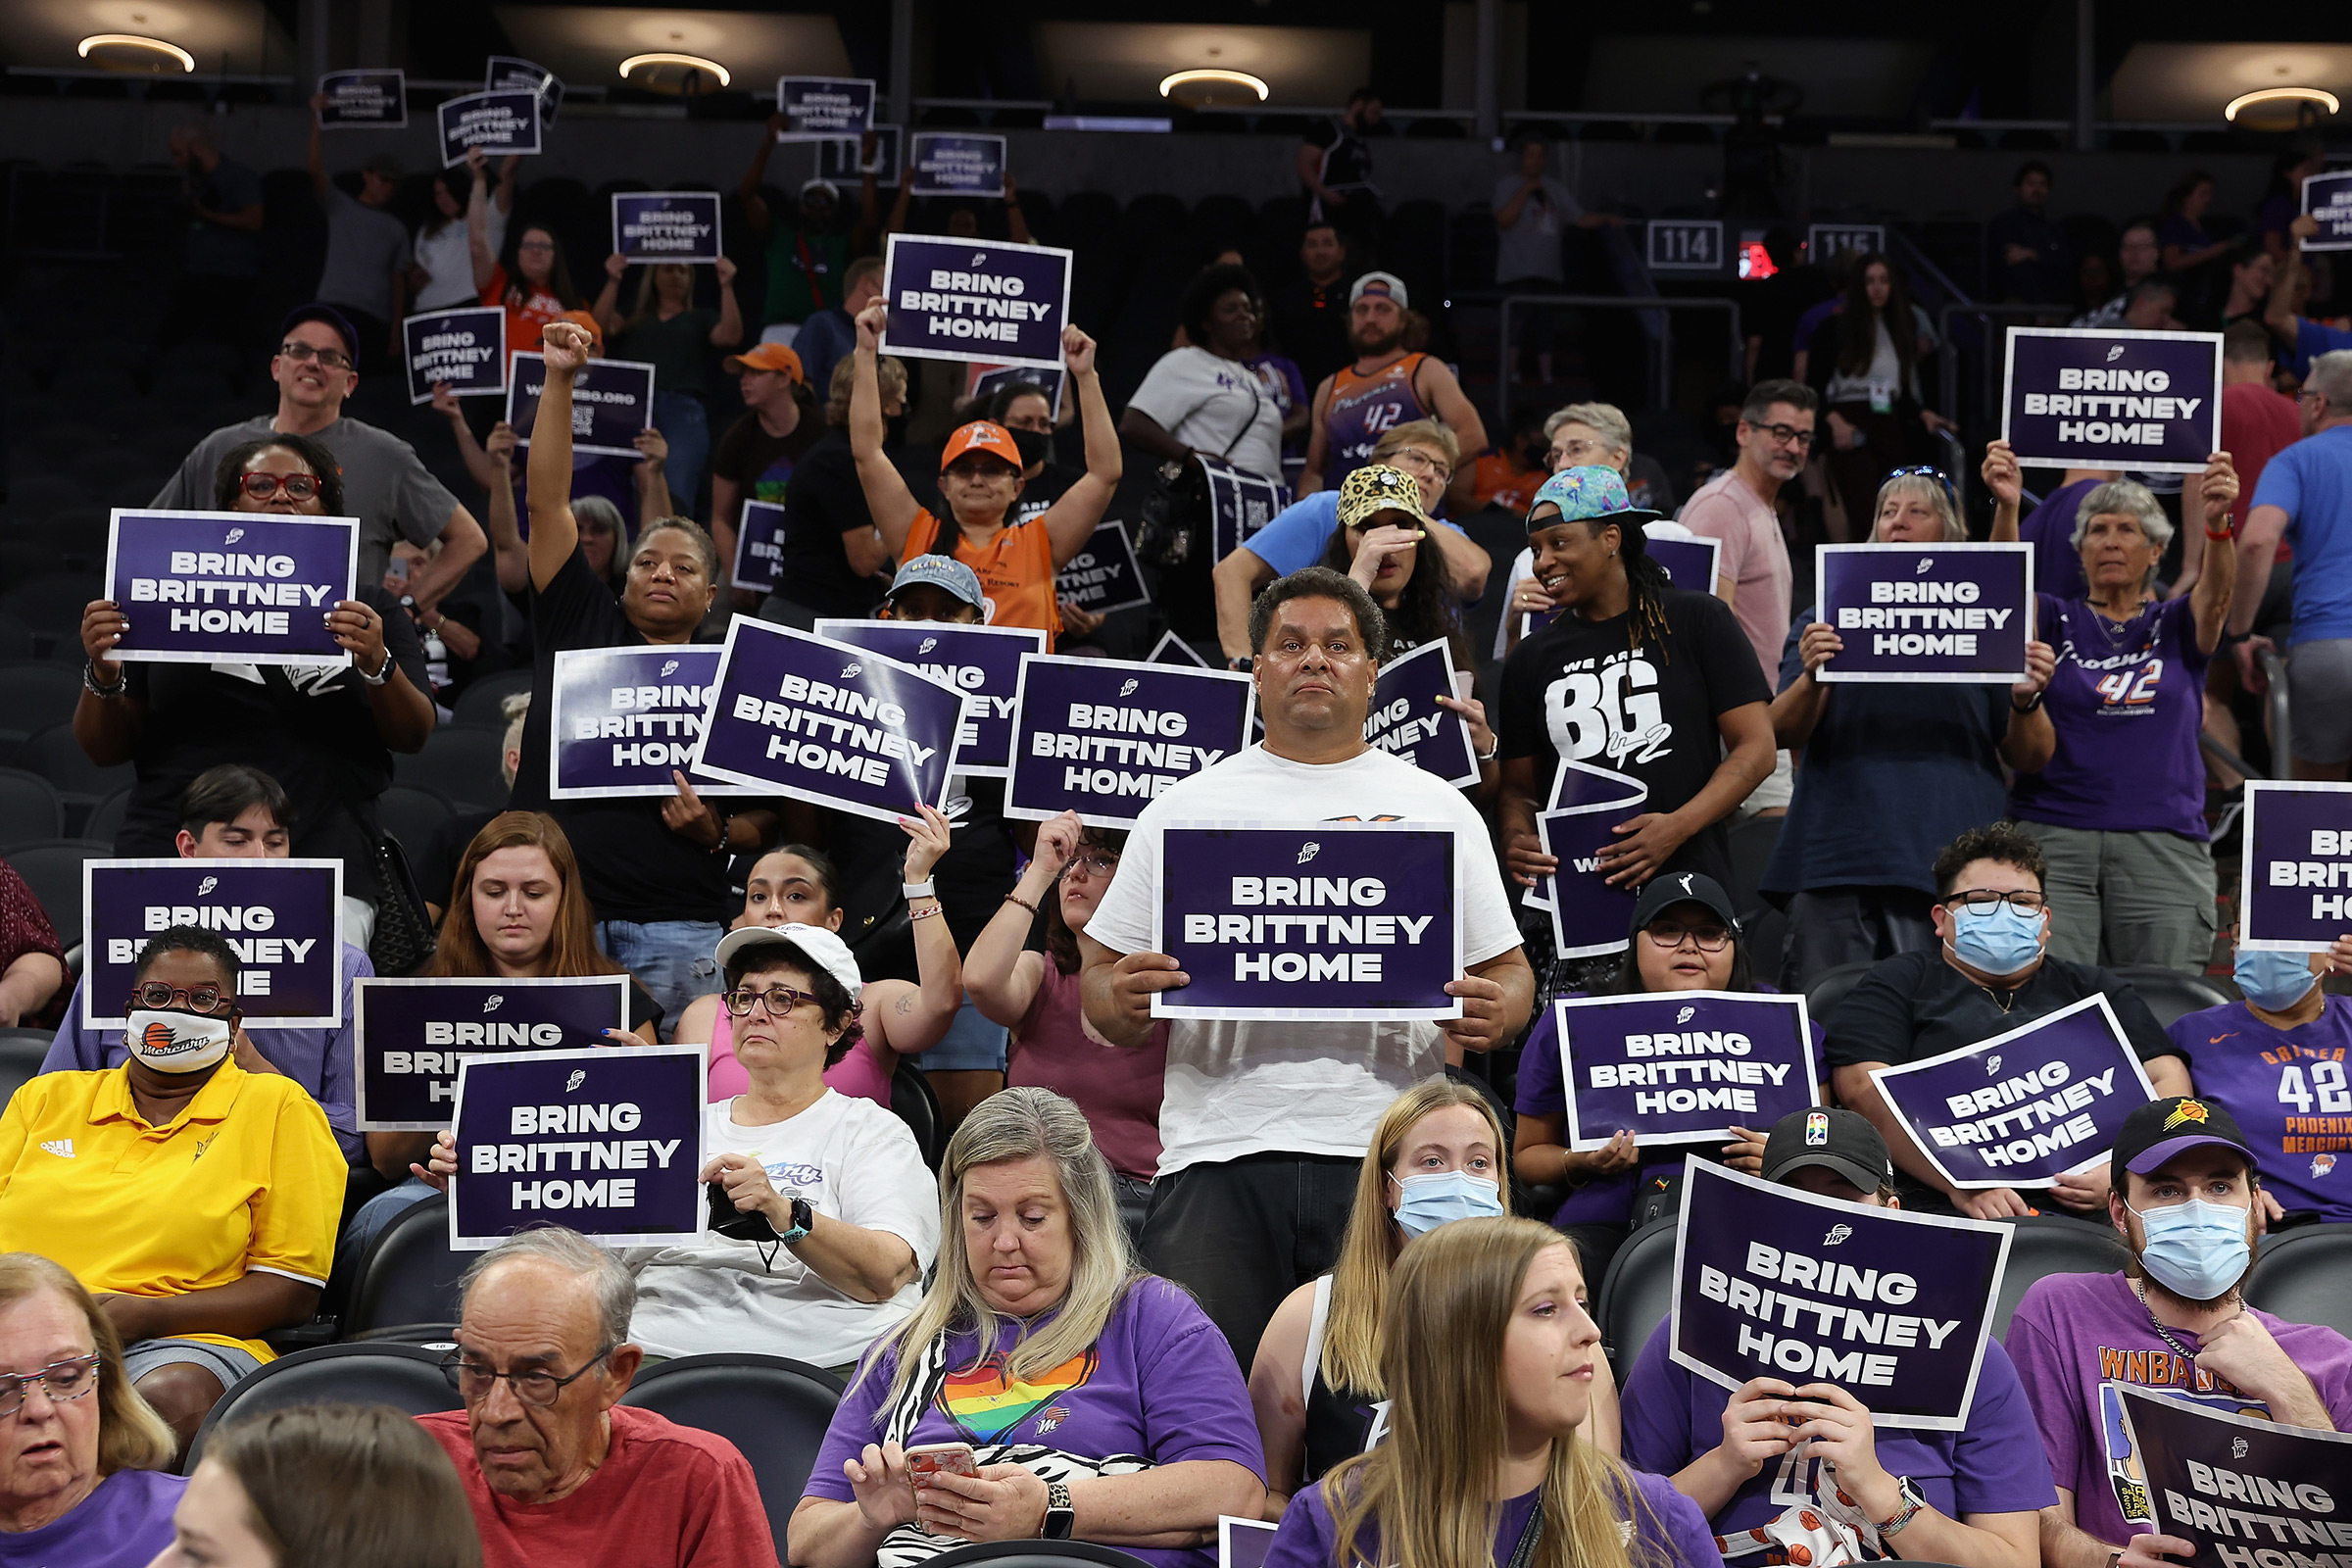 Supporters call for Griner’s release at a rally in Phoenix on July 6, 2022